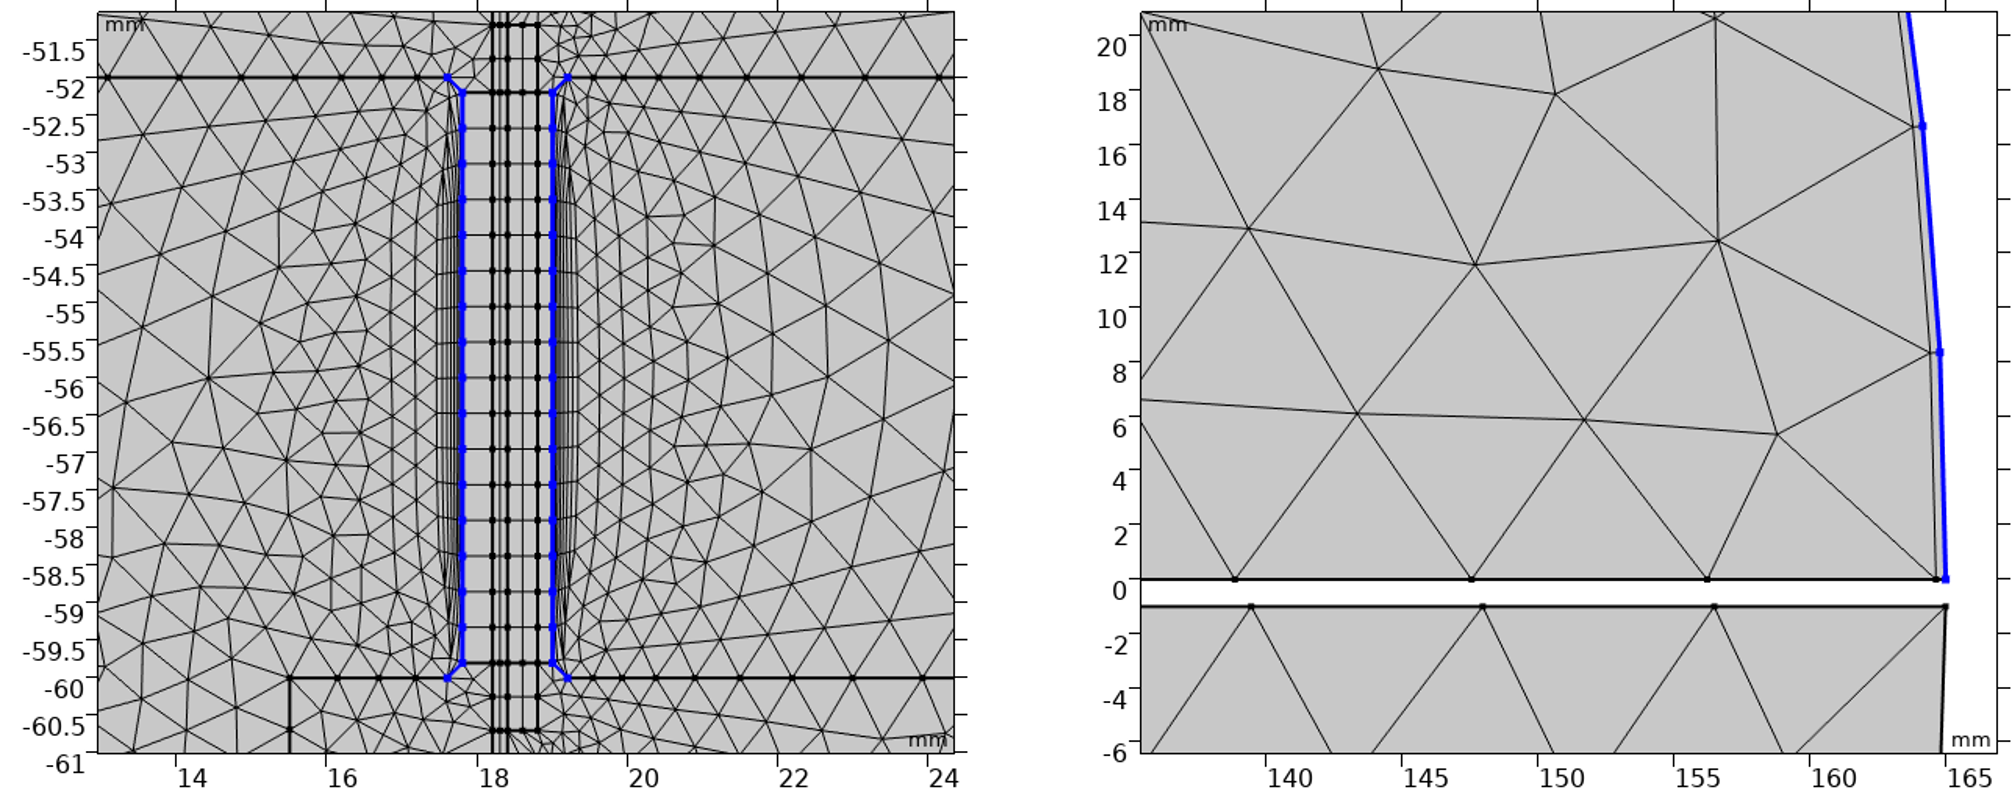 Two side-by-side close-ups of the mesh, showing where the boundary layer meshes are used in the model.